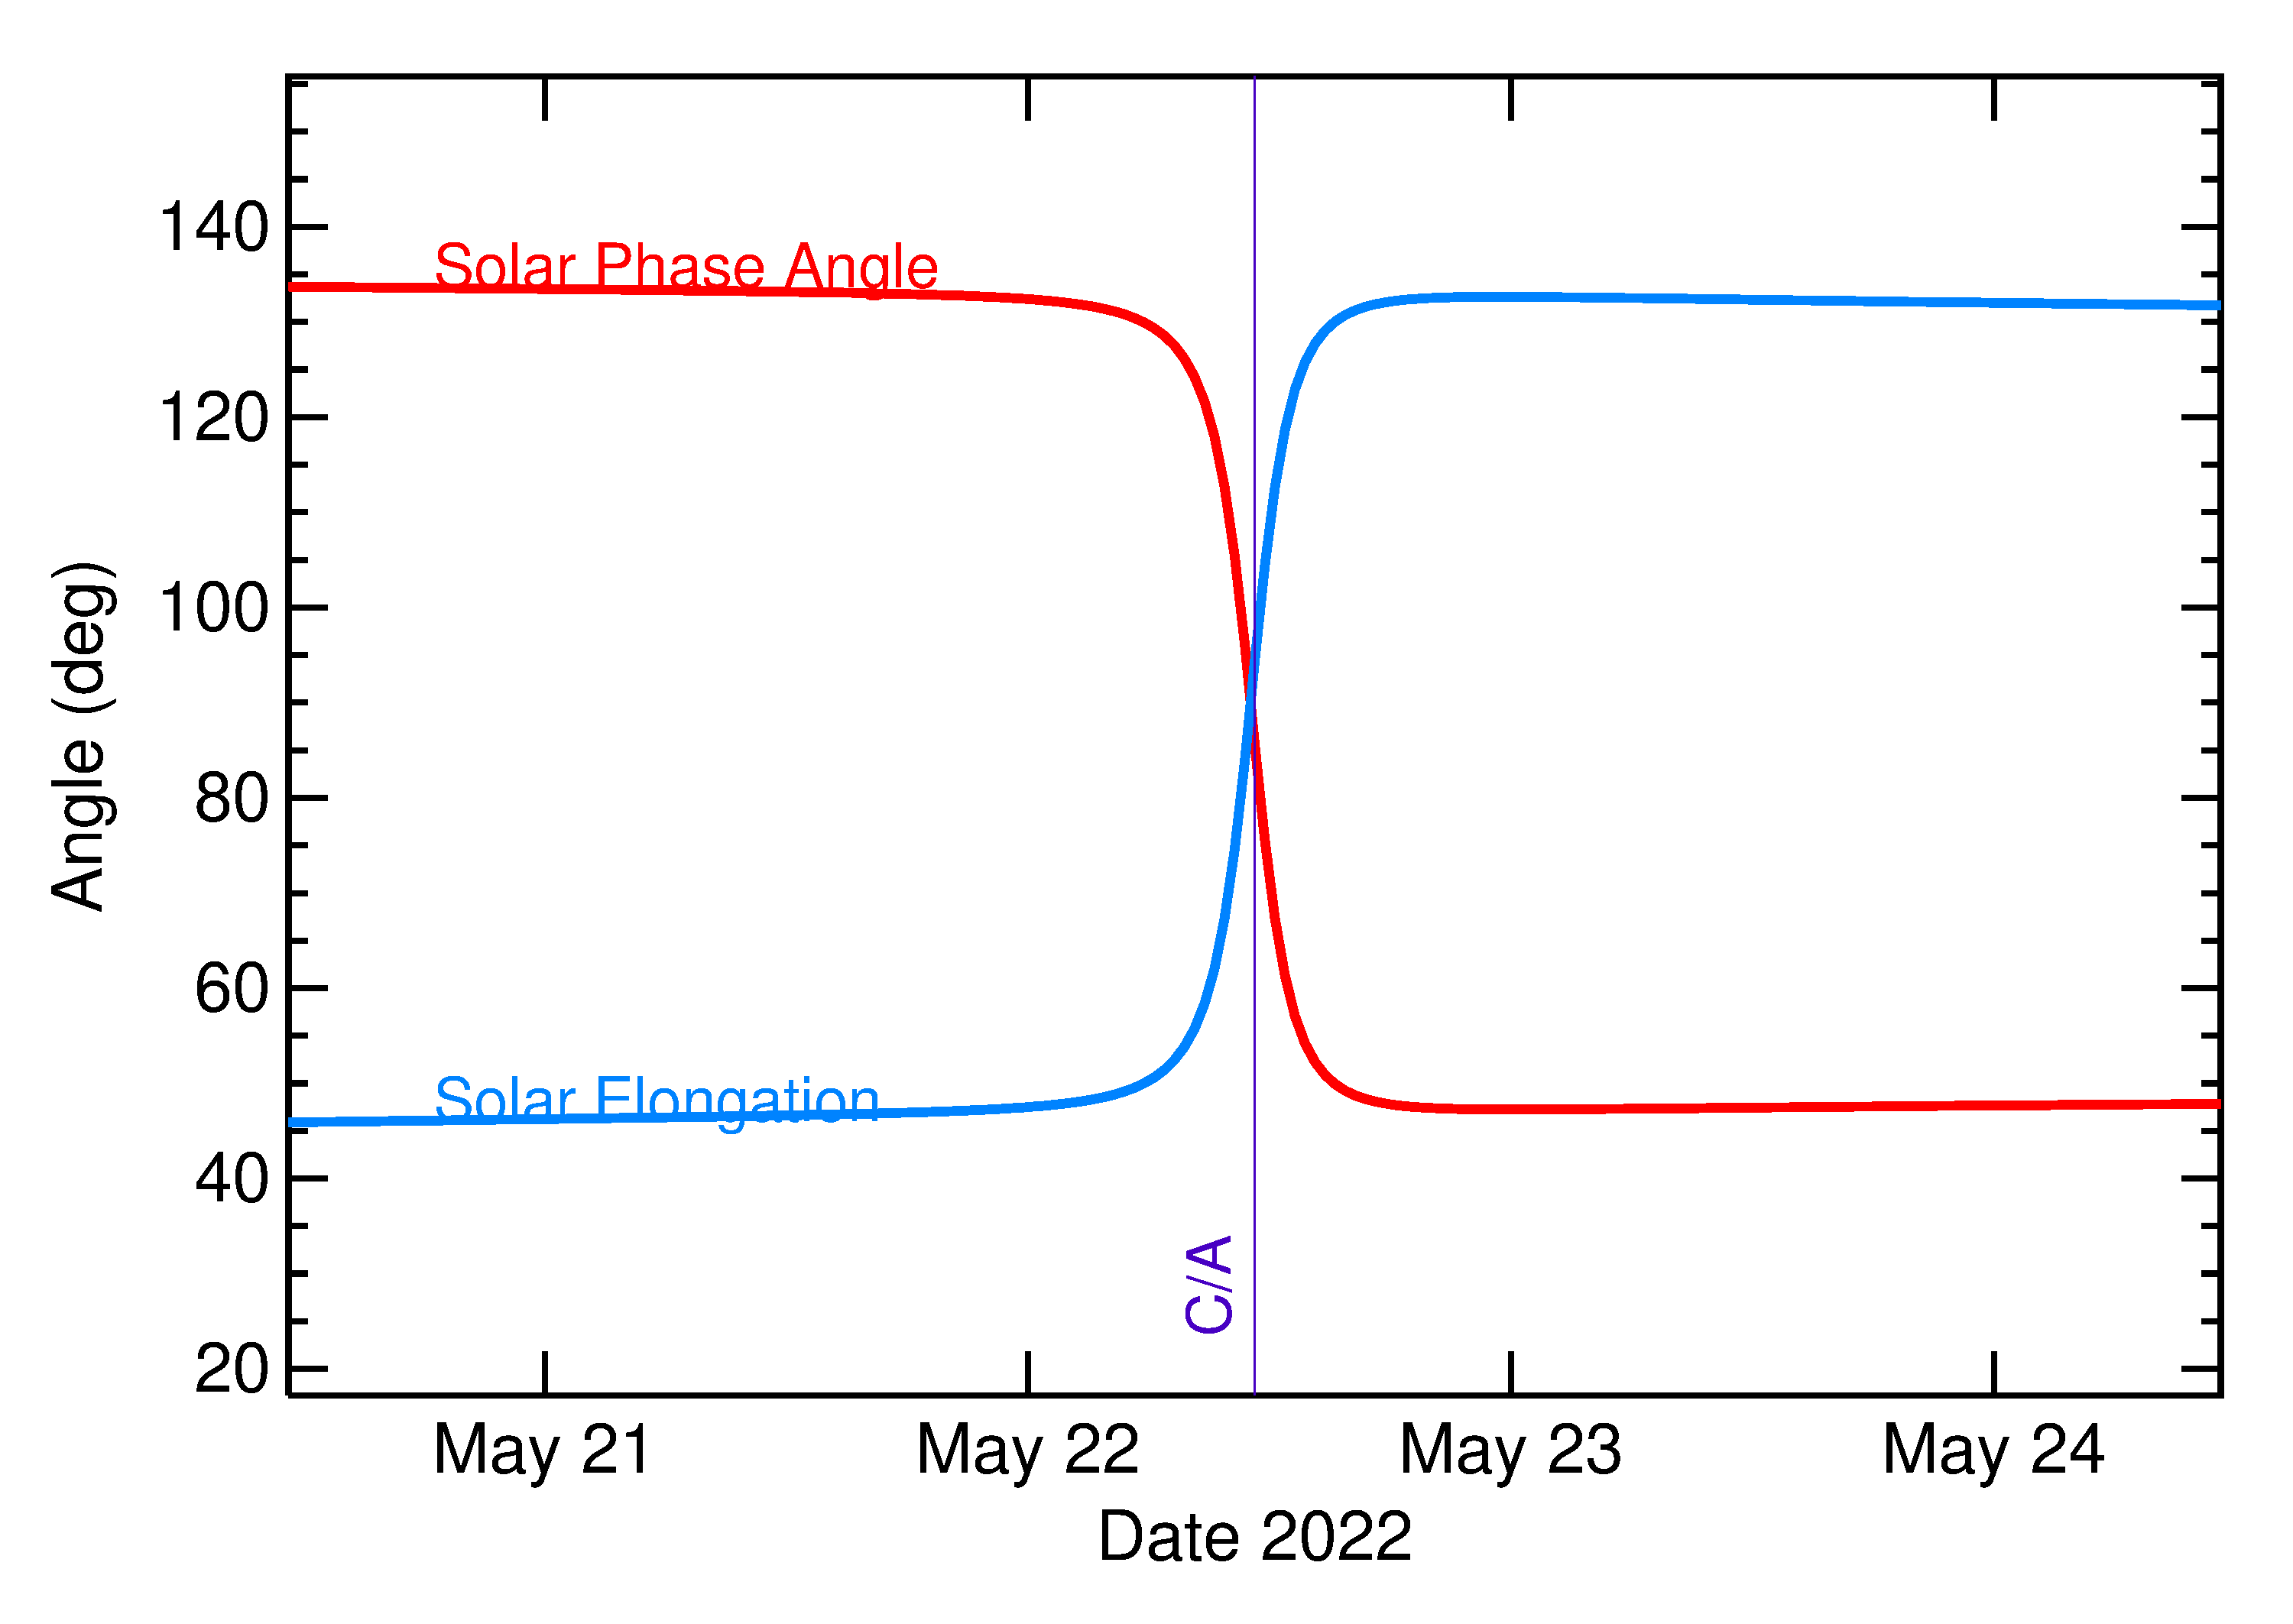 Solar Elongation and Solar Phase Angle of 2022 KG1 in the days around closest approach